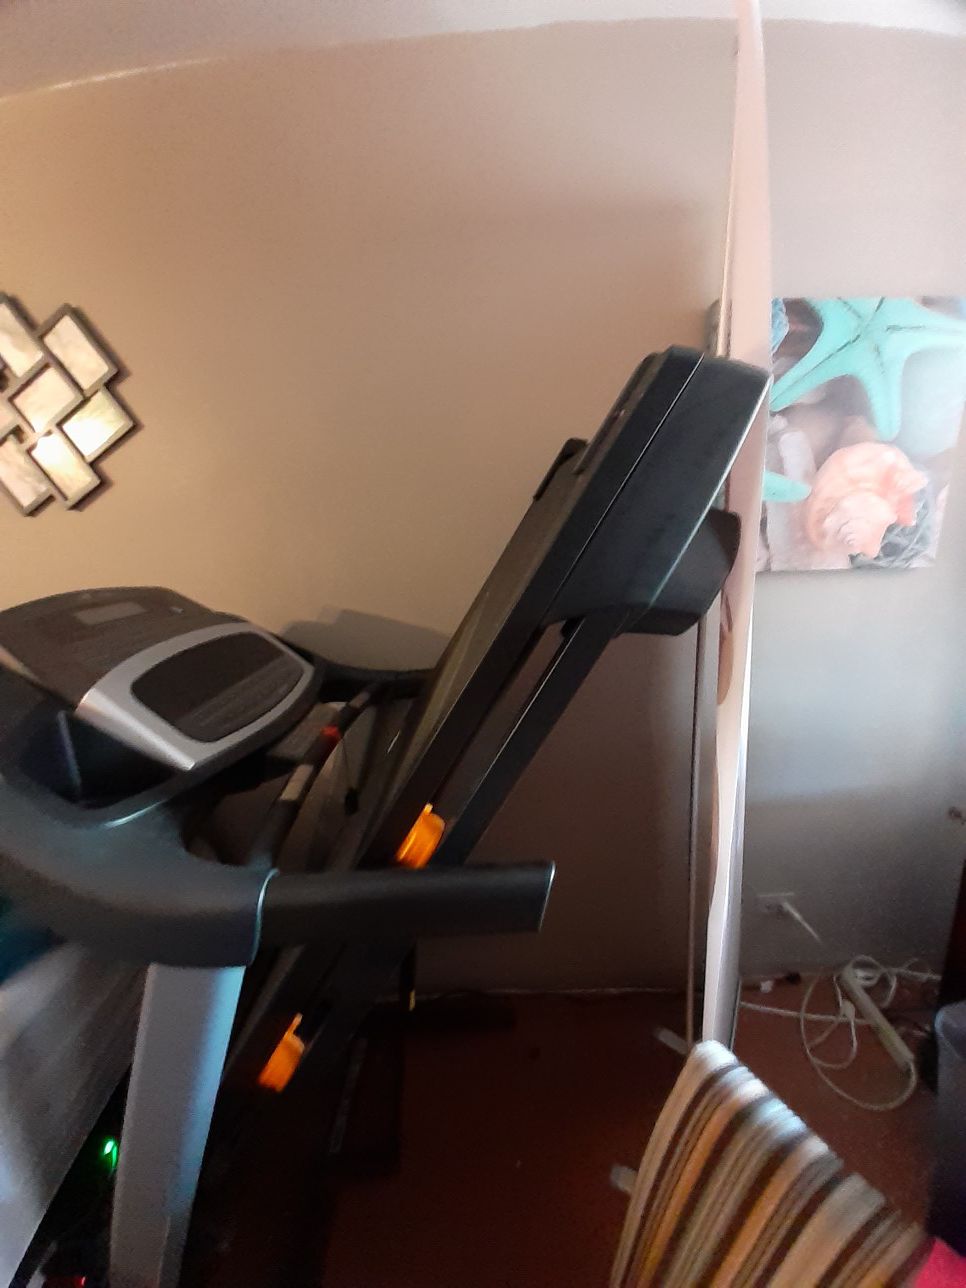 NordicTrack T6.7S Treadmill ... barely used